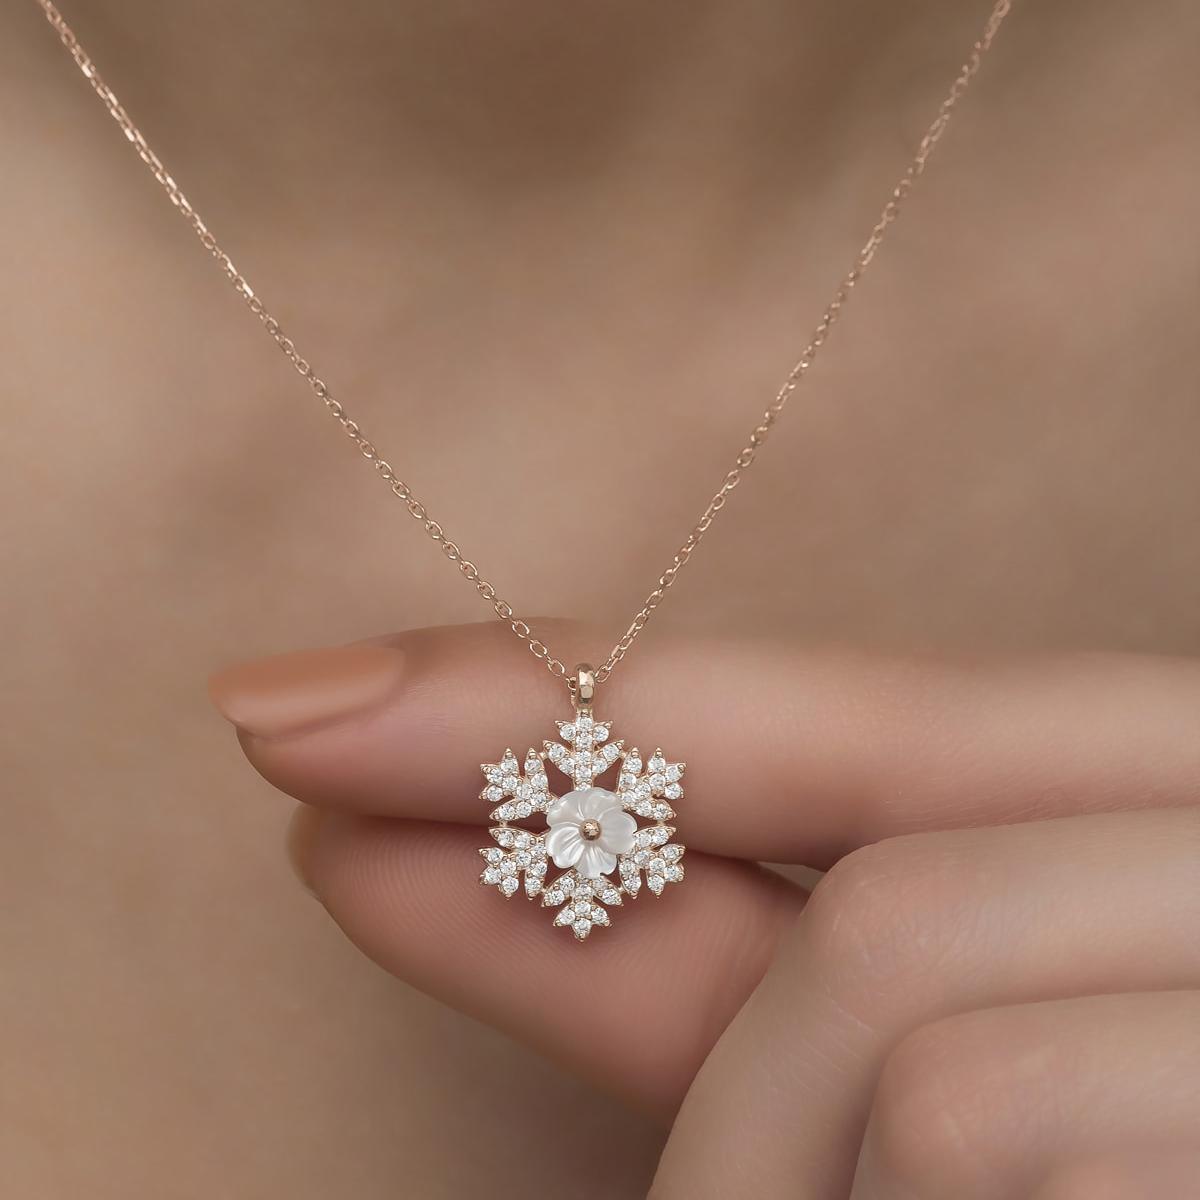 Snowflake Necklace Diamond • Magnolia Flower Necklace • Gift For Mom - Trending Silver Gifts